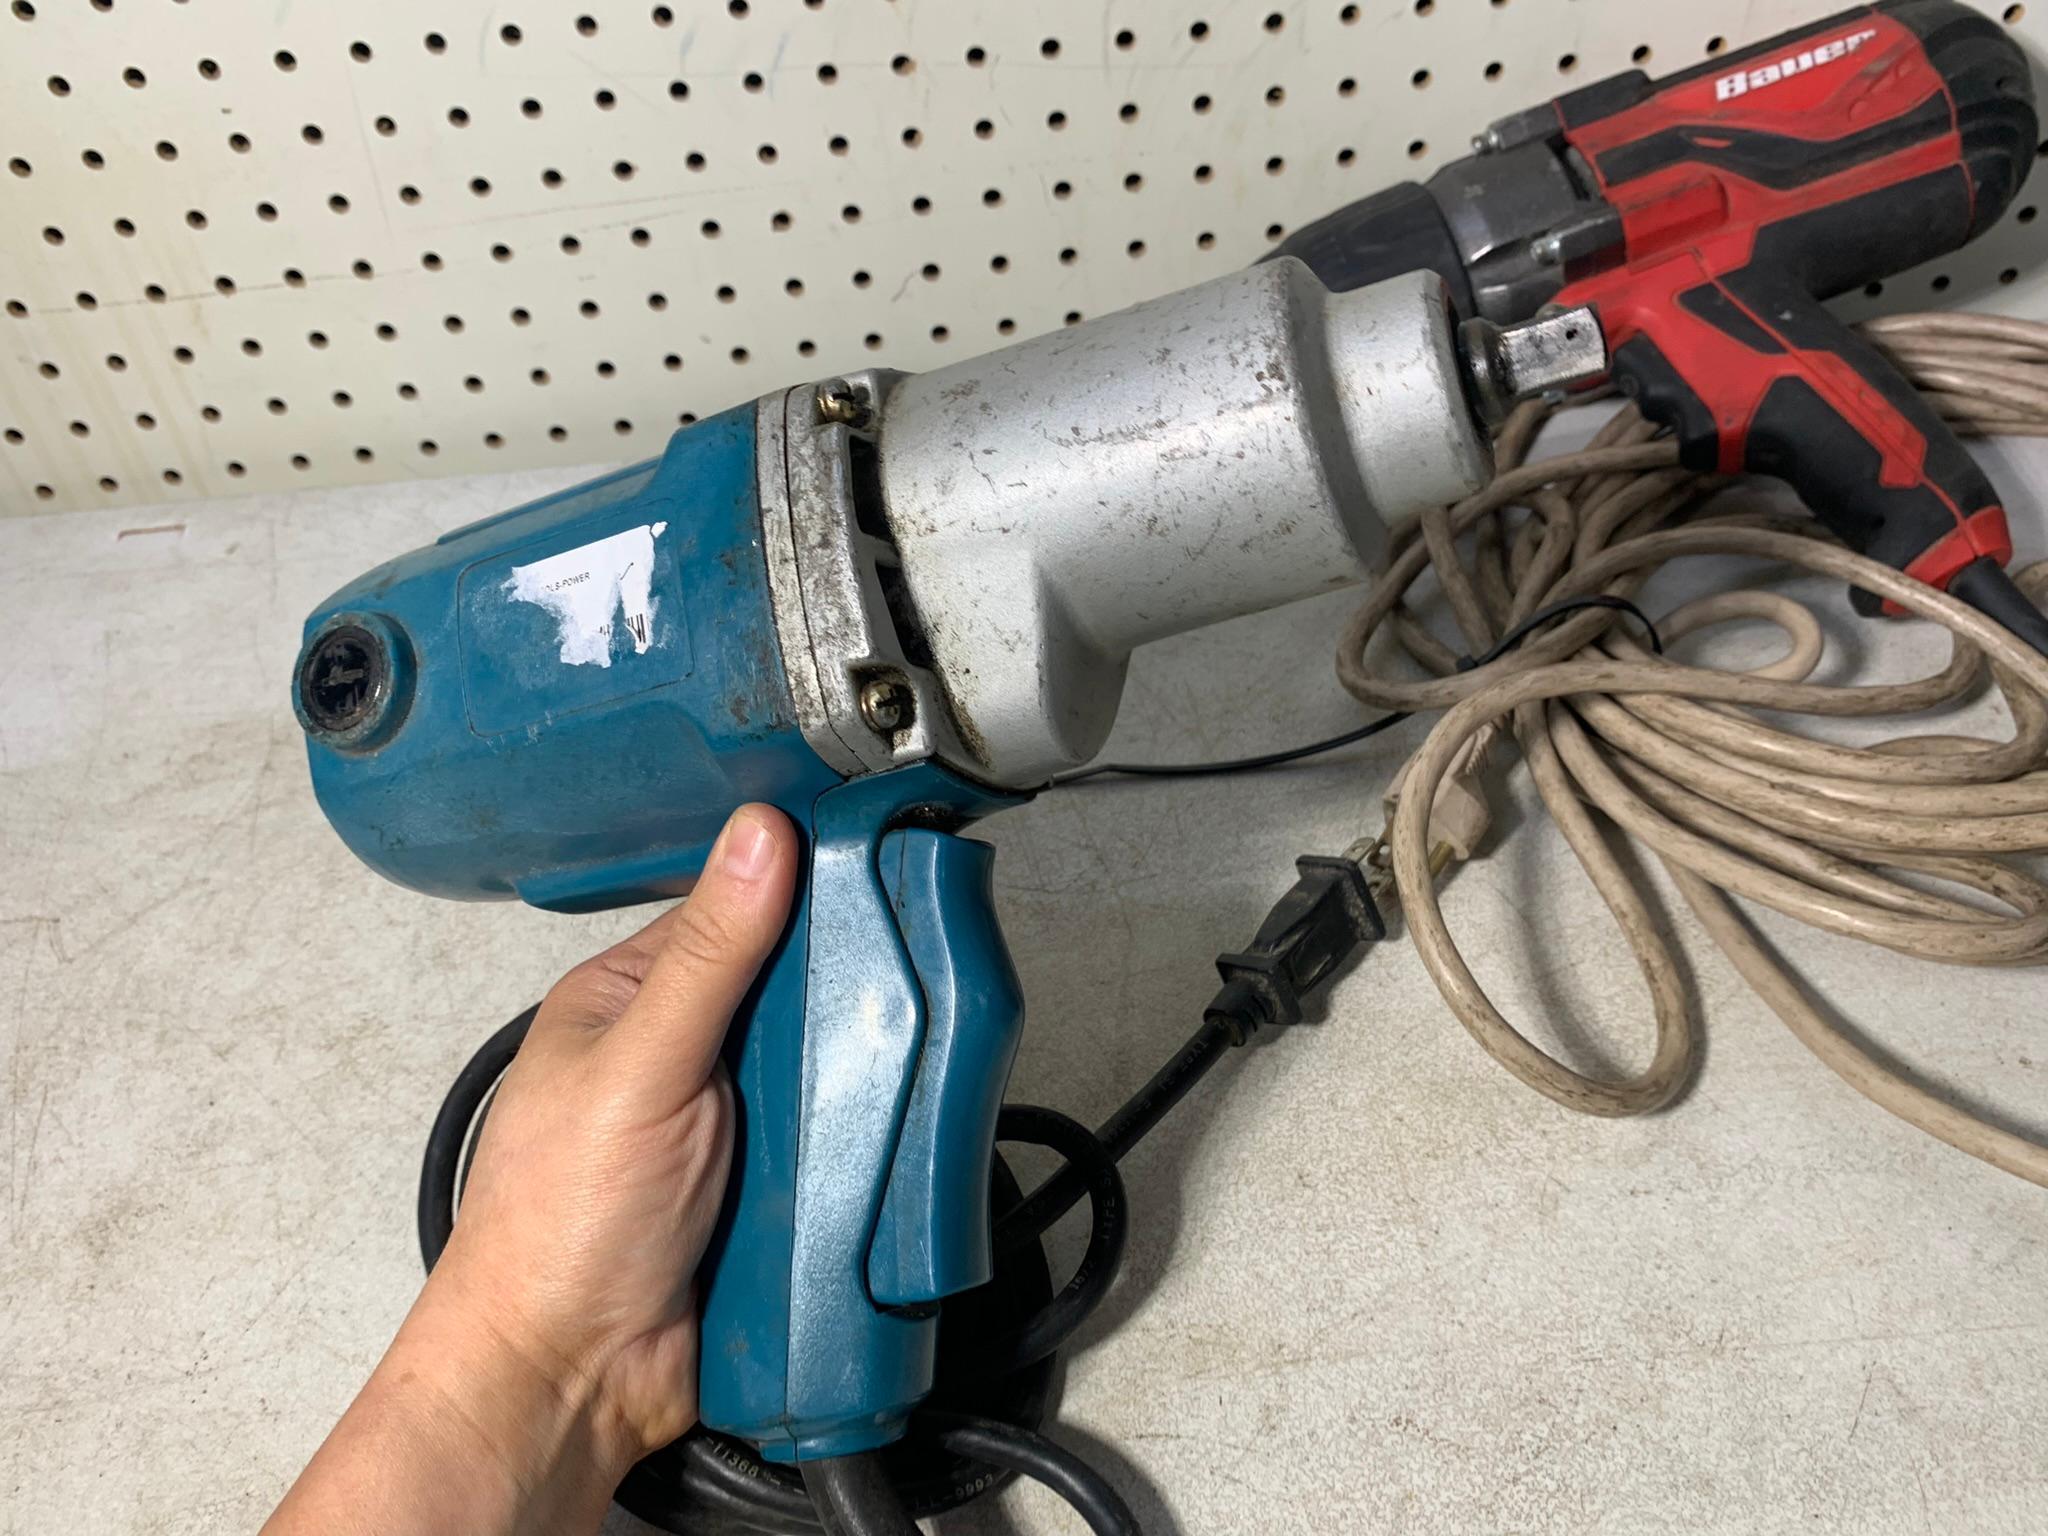 Jepson & Bauer Impact Wrench